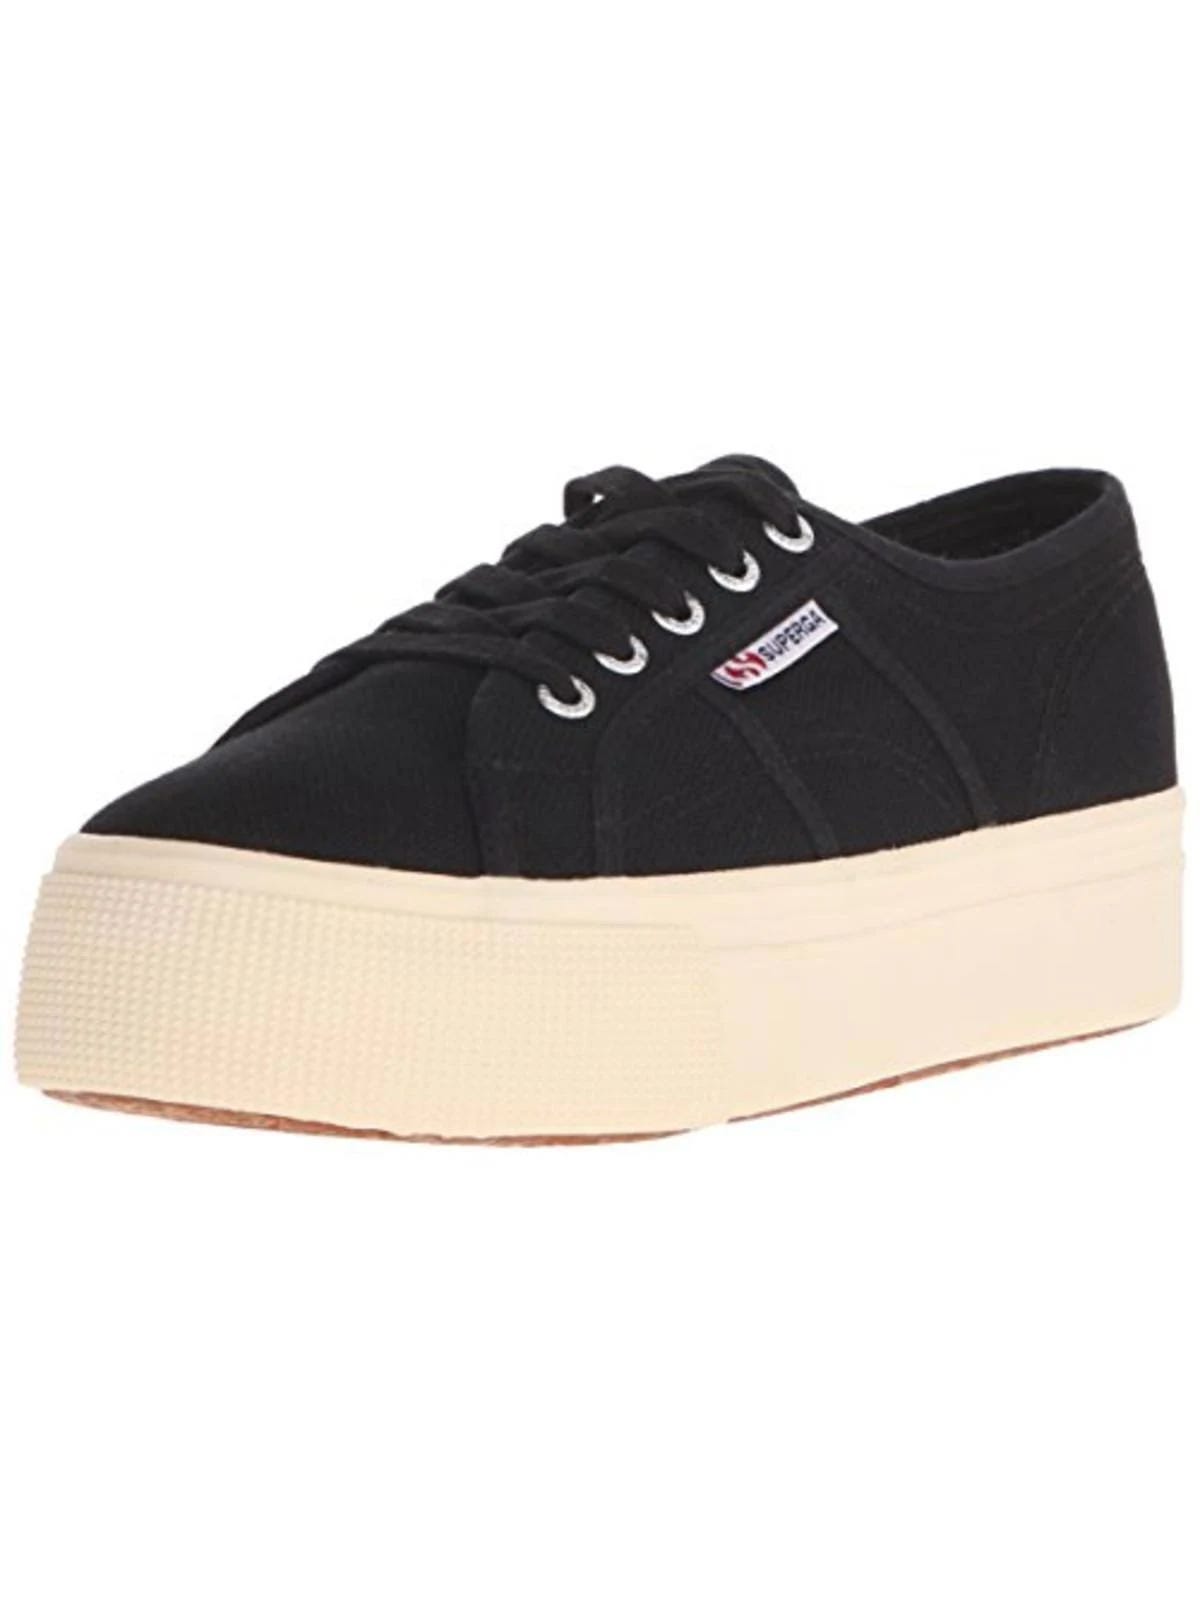 Superga Acotw Women's Black Platform Sneaker - Elevated Fashion with a Sporty Twist | Image